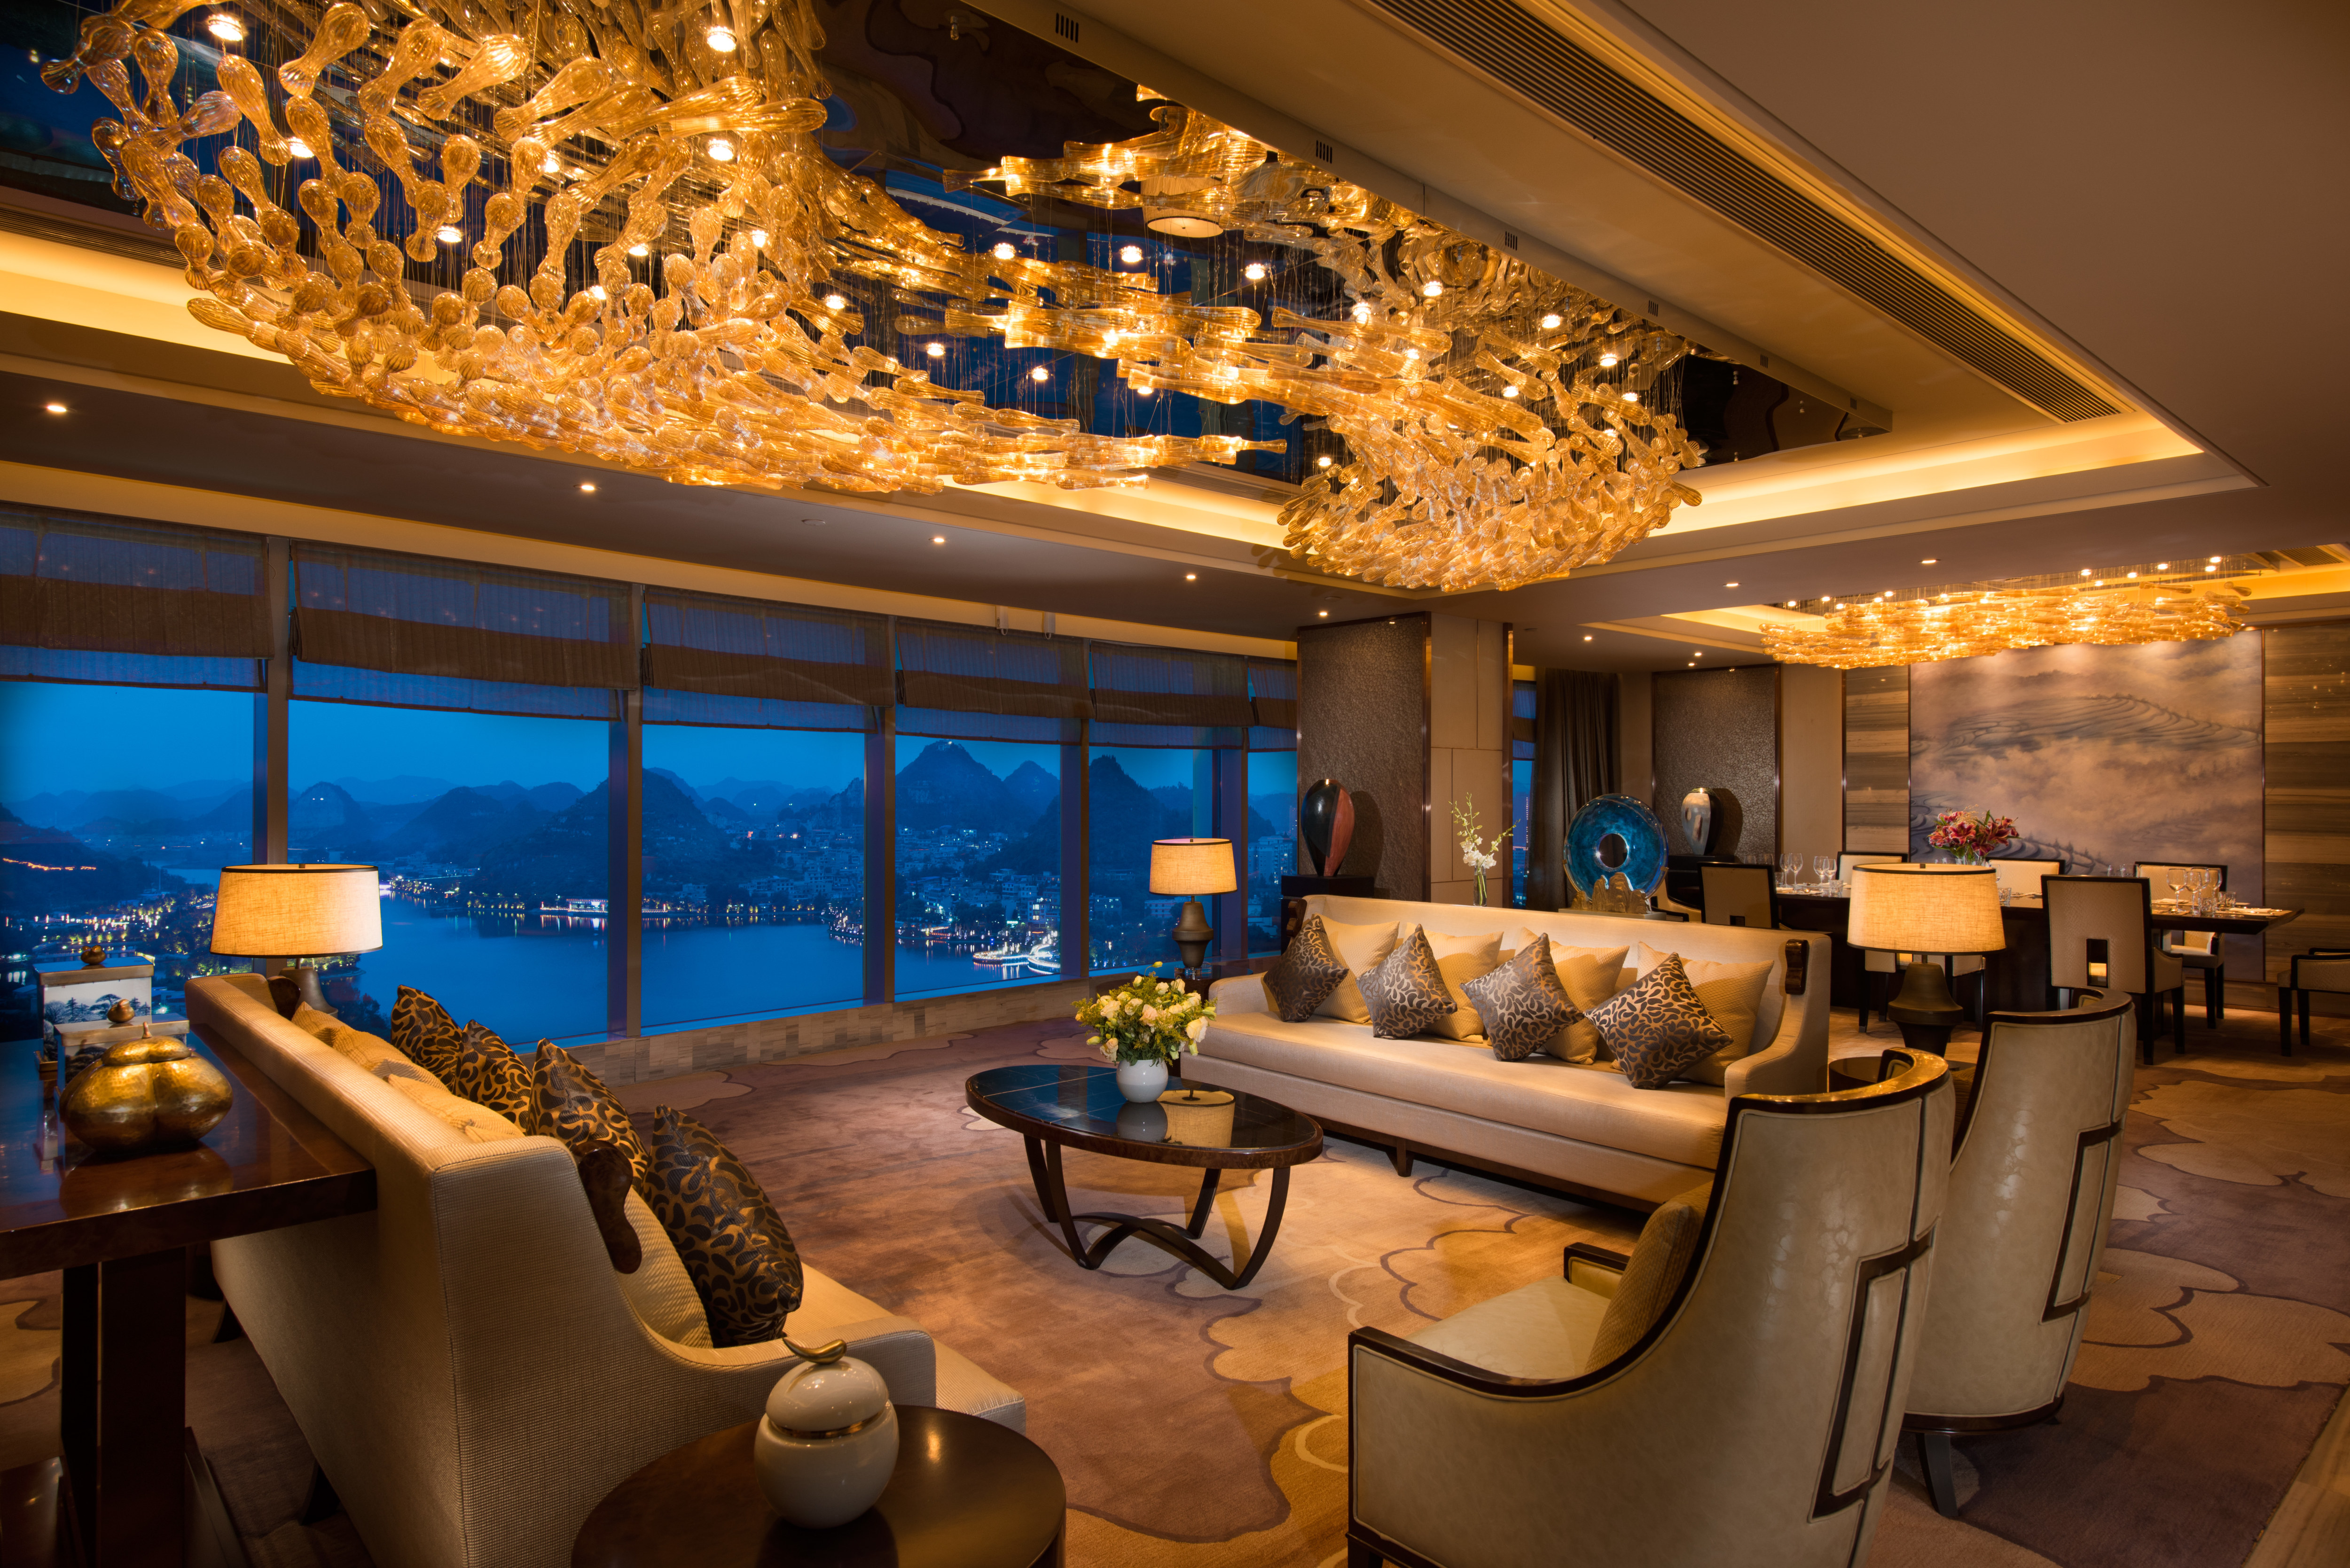 Illuminated Presidential Suite With Tables, Soft Seating, and Large Window With Lake View at Night